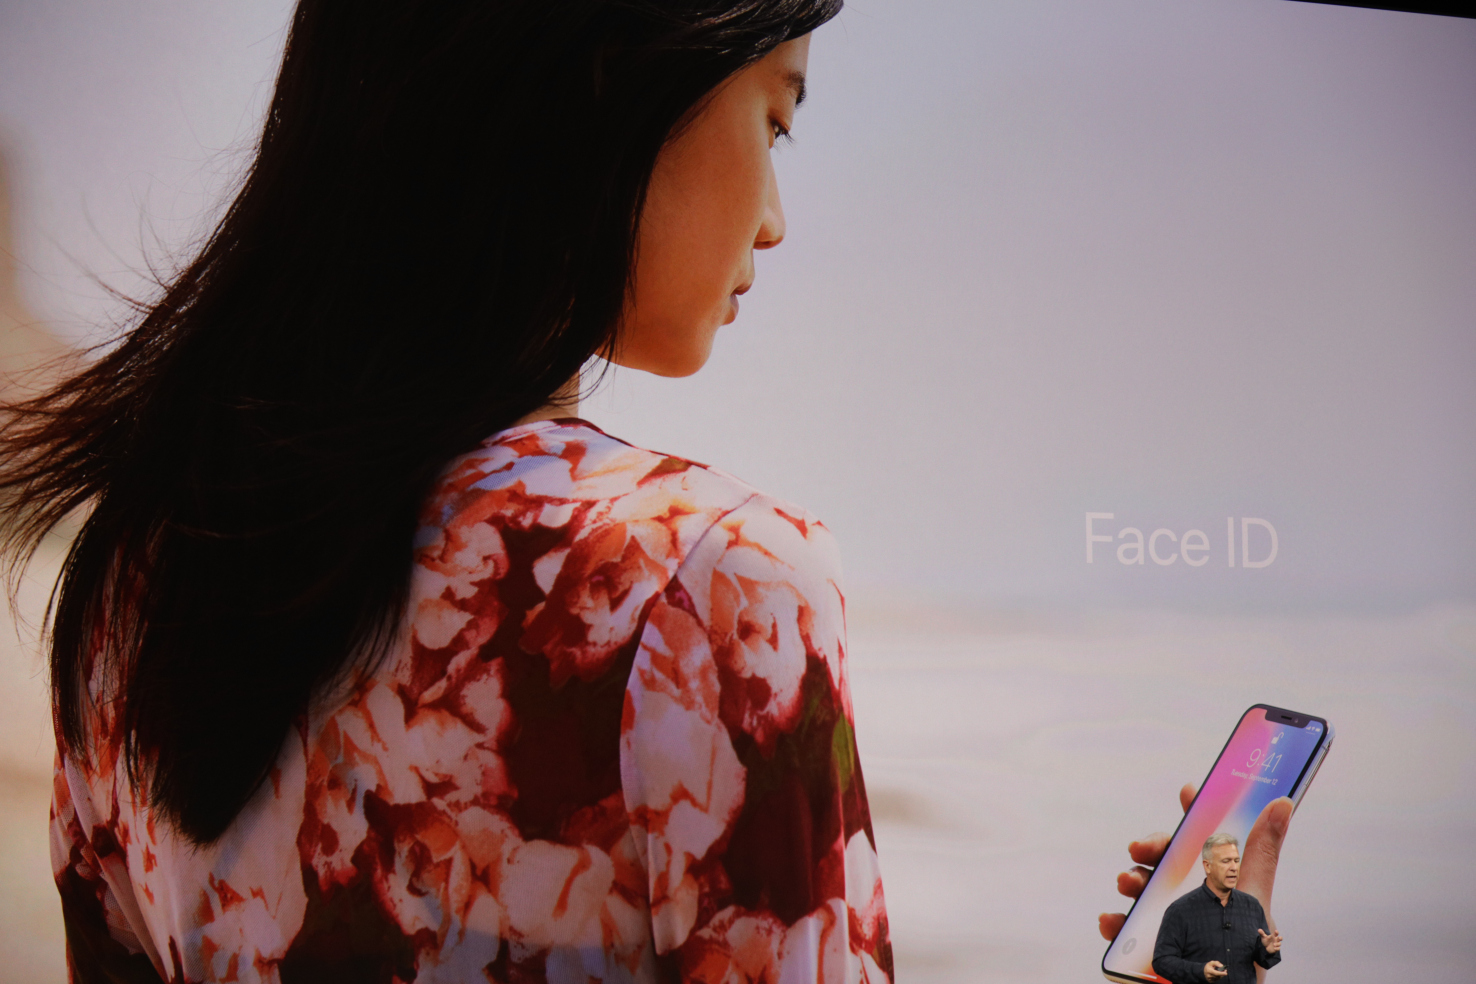 Iphone X S Face Id Raises Security And Privacy Questions Techcrunch